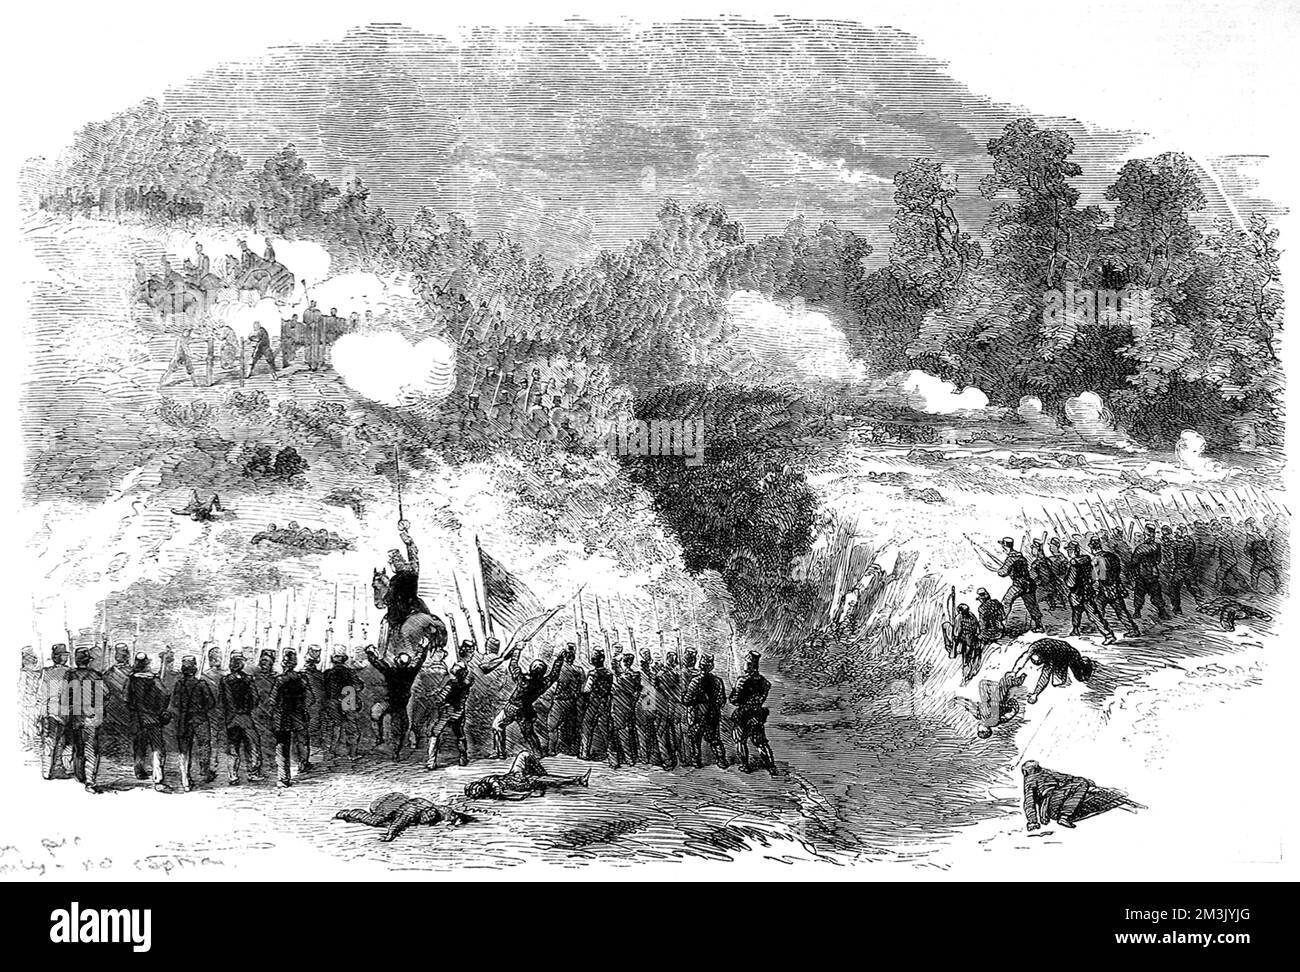 Attack on the Confederate batteries at Bull Run by the 27th and 14th New York regiments. The battle of Bull Run was the first major battle of the civil war, seen here from the Confederate side. The Confederates forced the Unionists to withdraw to Washington.     Date: 1861 Stock Photo